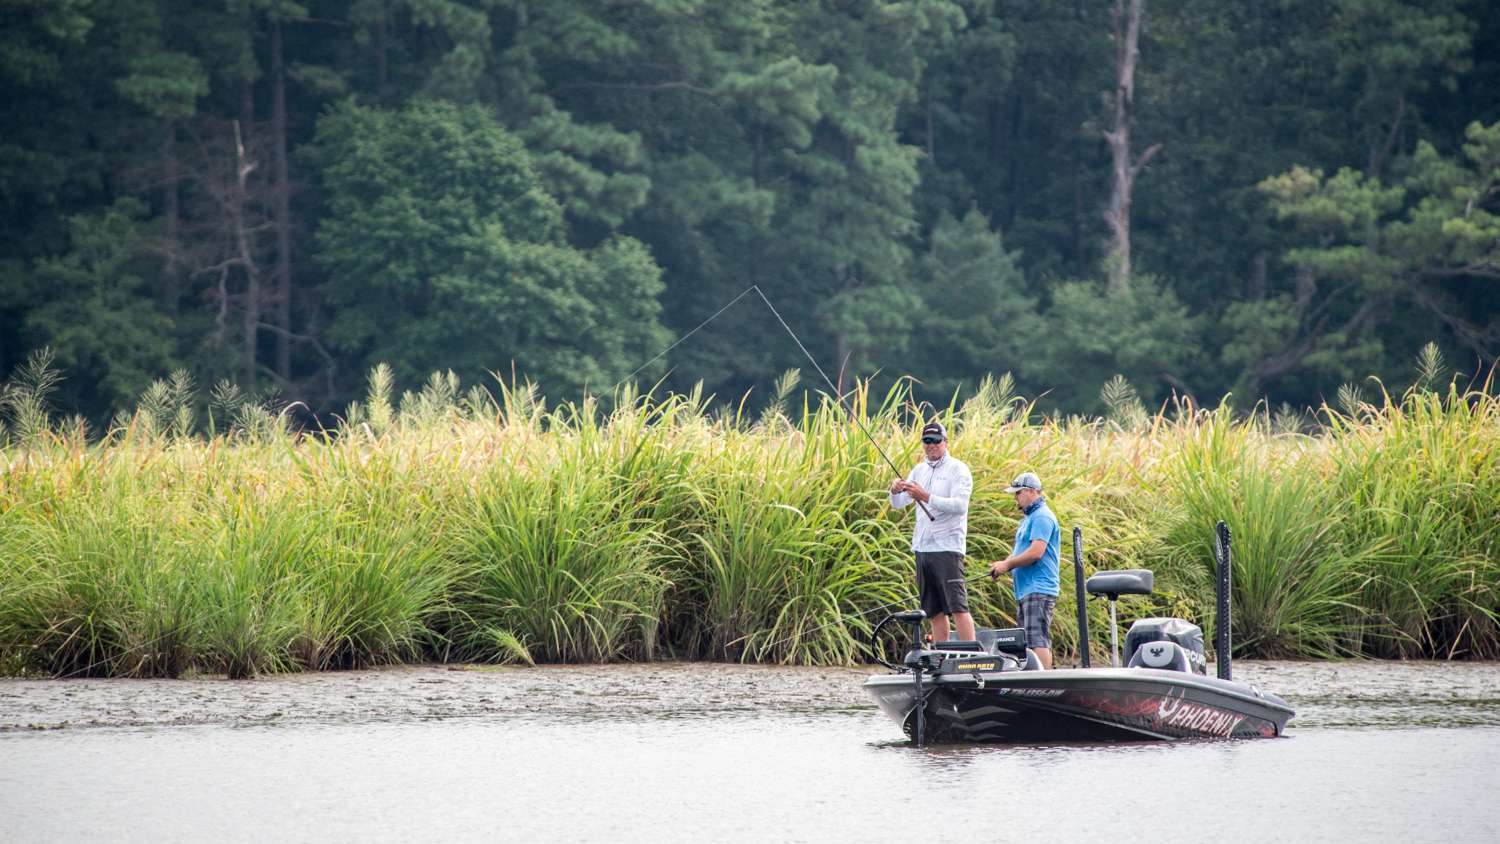 Head out with the pros and cos as they take on the first day of the 2016 Bass Pro Shops Northern Open #2.